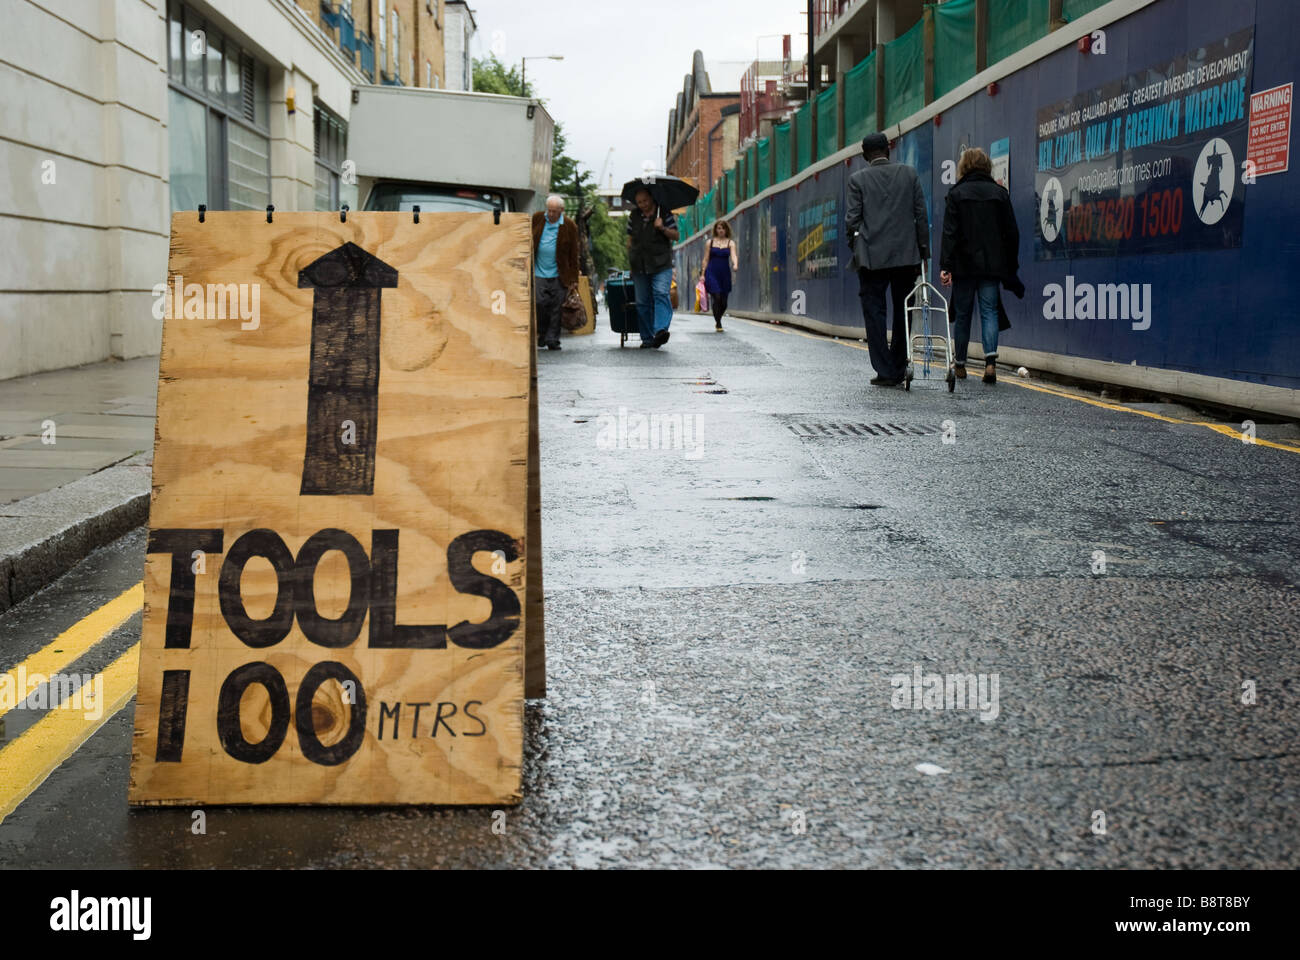 A hand painted sign advertises tools for sale in Brick Lane in East London, UK. Stock Photo